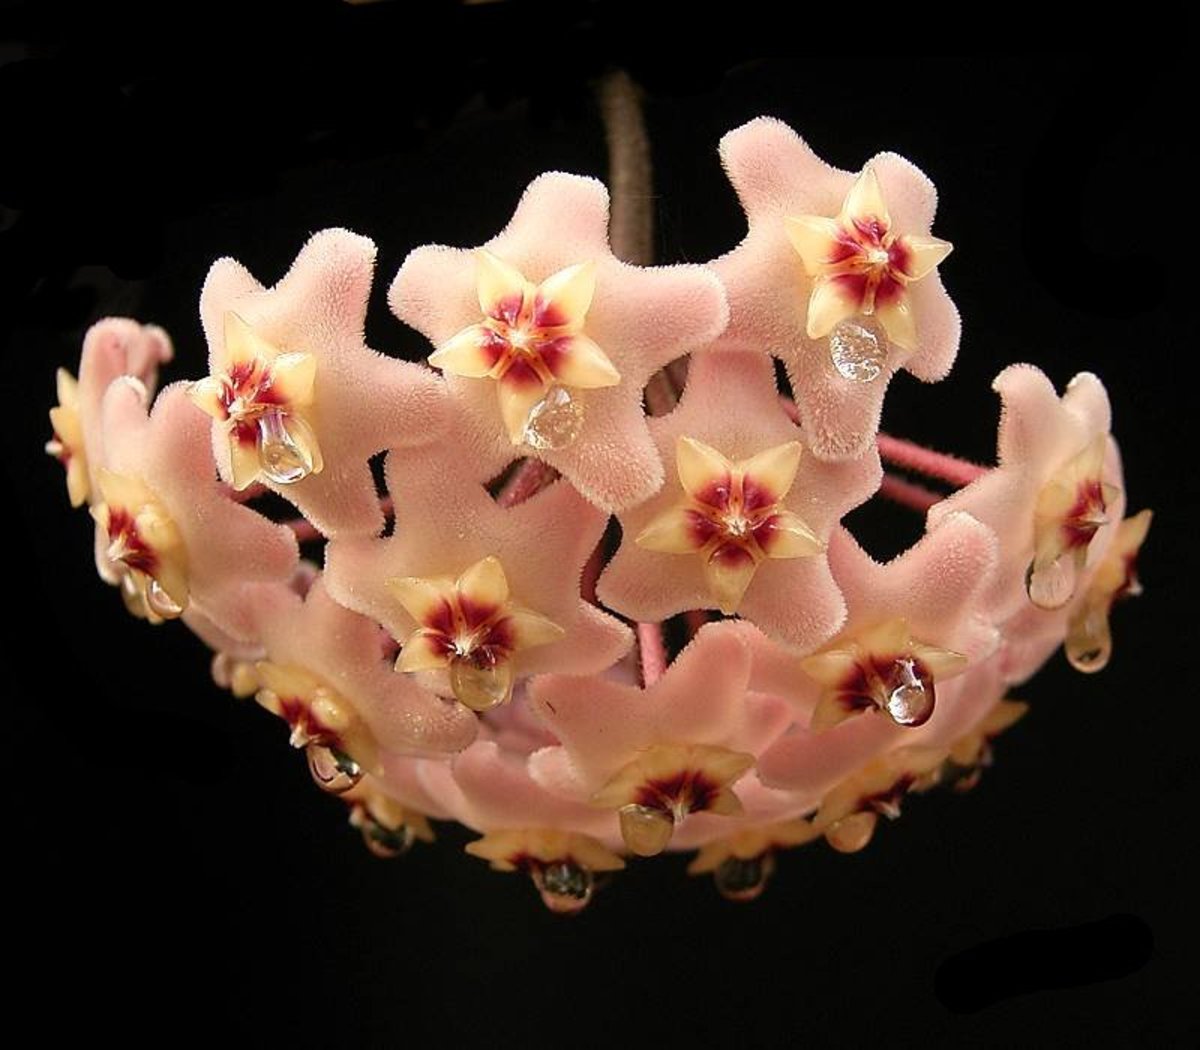 Hoya flowers produce nectar to attract insect pollinators